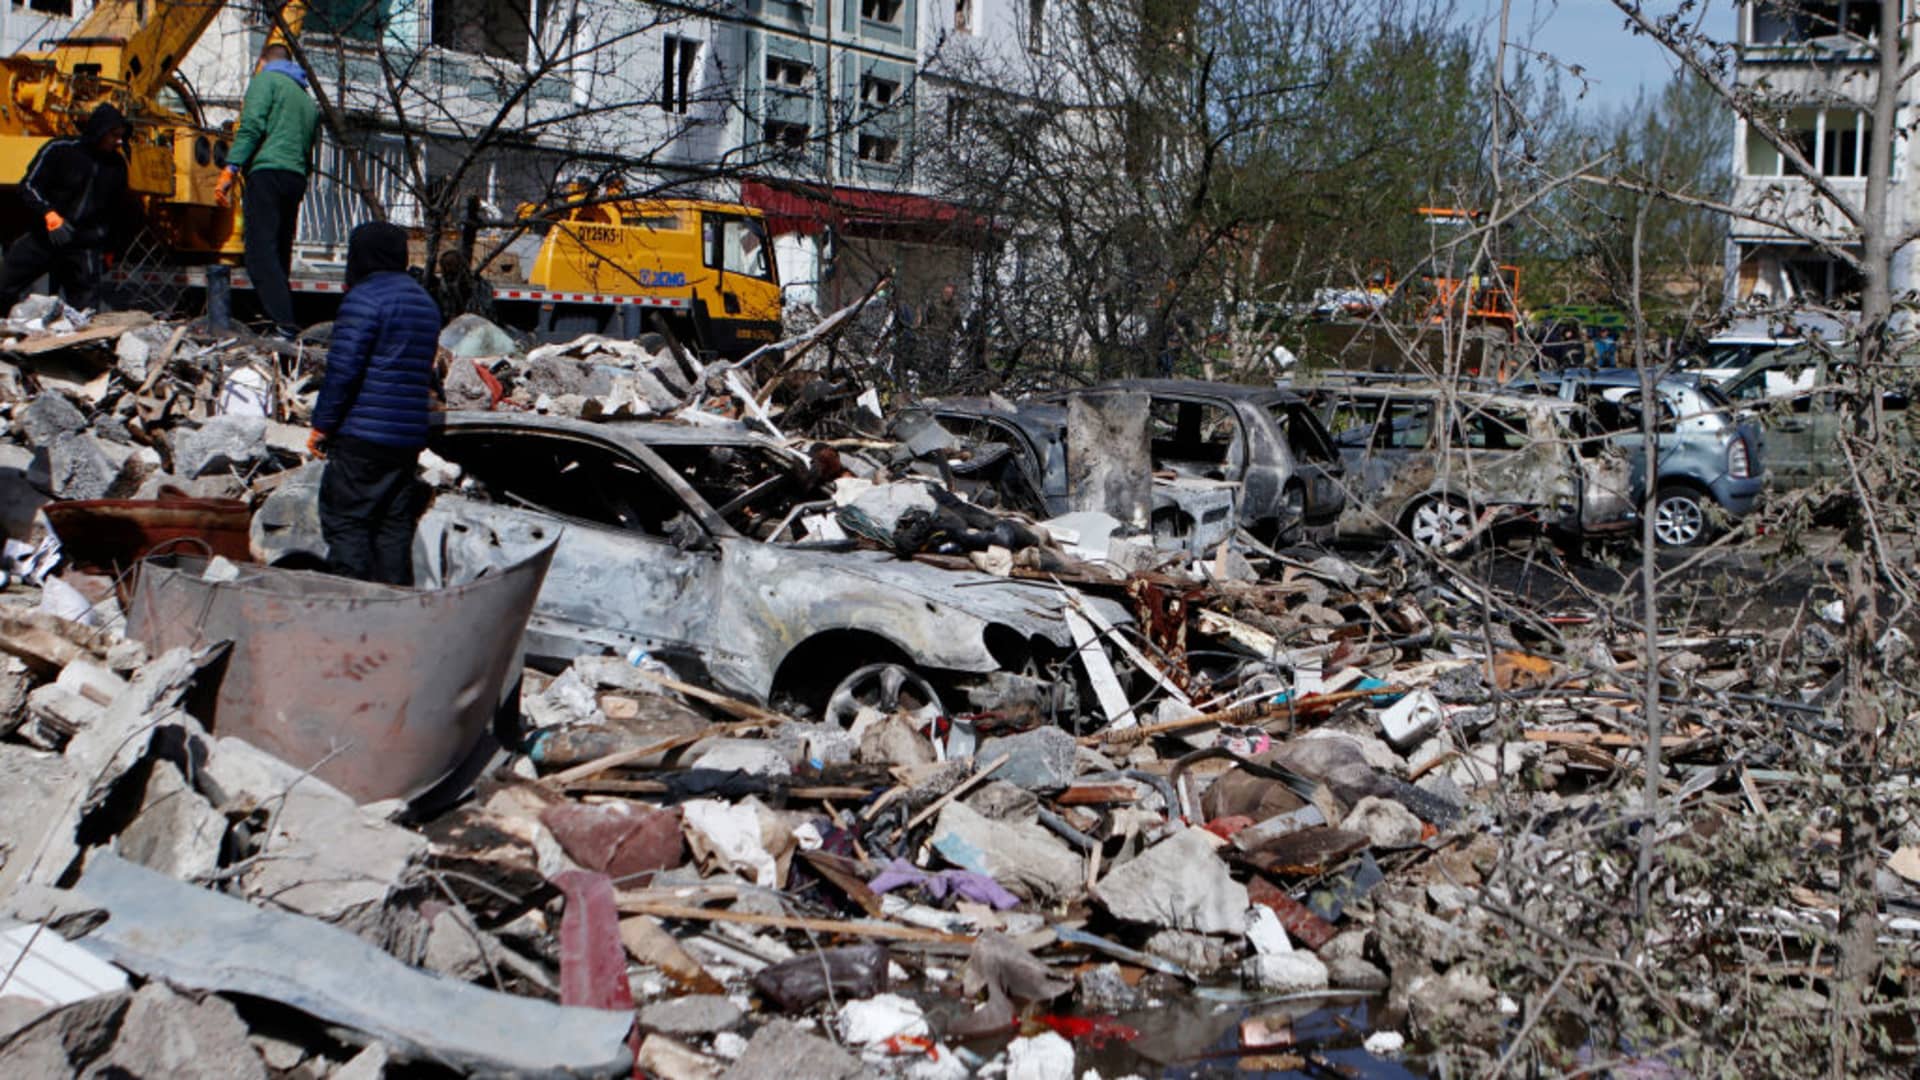 A man stands amid rubble near burnt car on April 28, 2023 in Uman, Ukraine. Overnight, Russia carried out a massive missile attack on the entire territory of Ukraine. A rocket hit a residential building in Uman. Rescuers are conducting a search and rescue operation. (Photo by Yan Dobronosov/Global Images Ukraine via Getty Images)